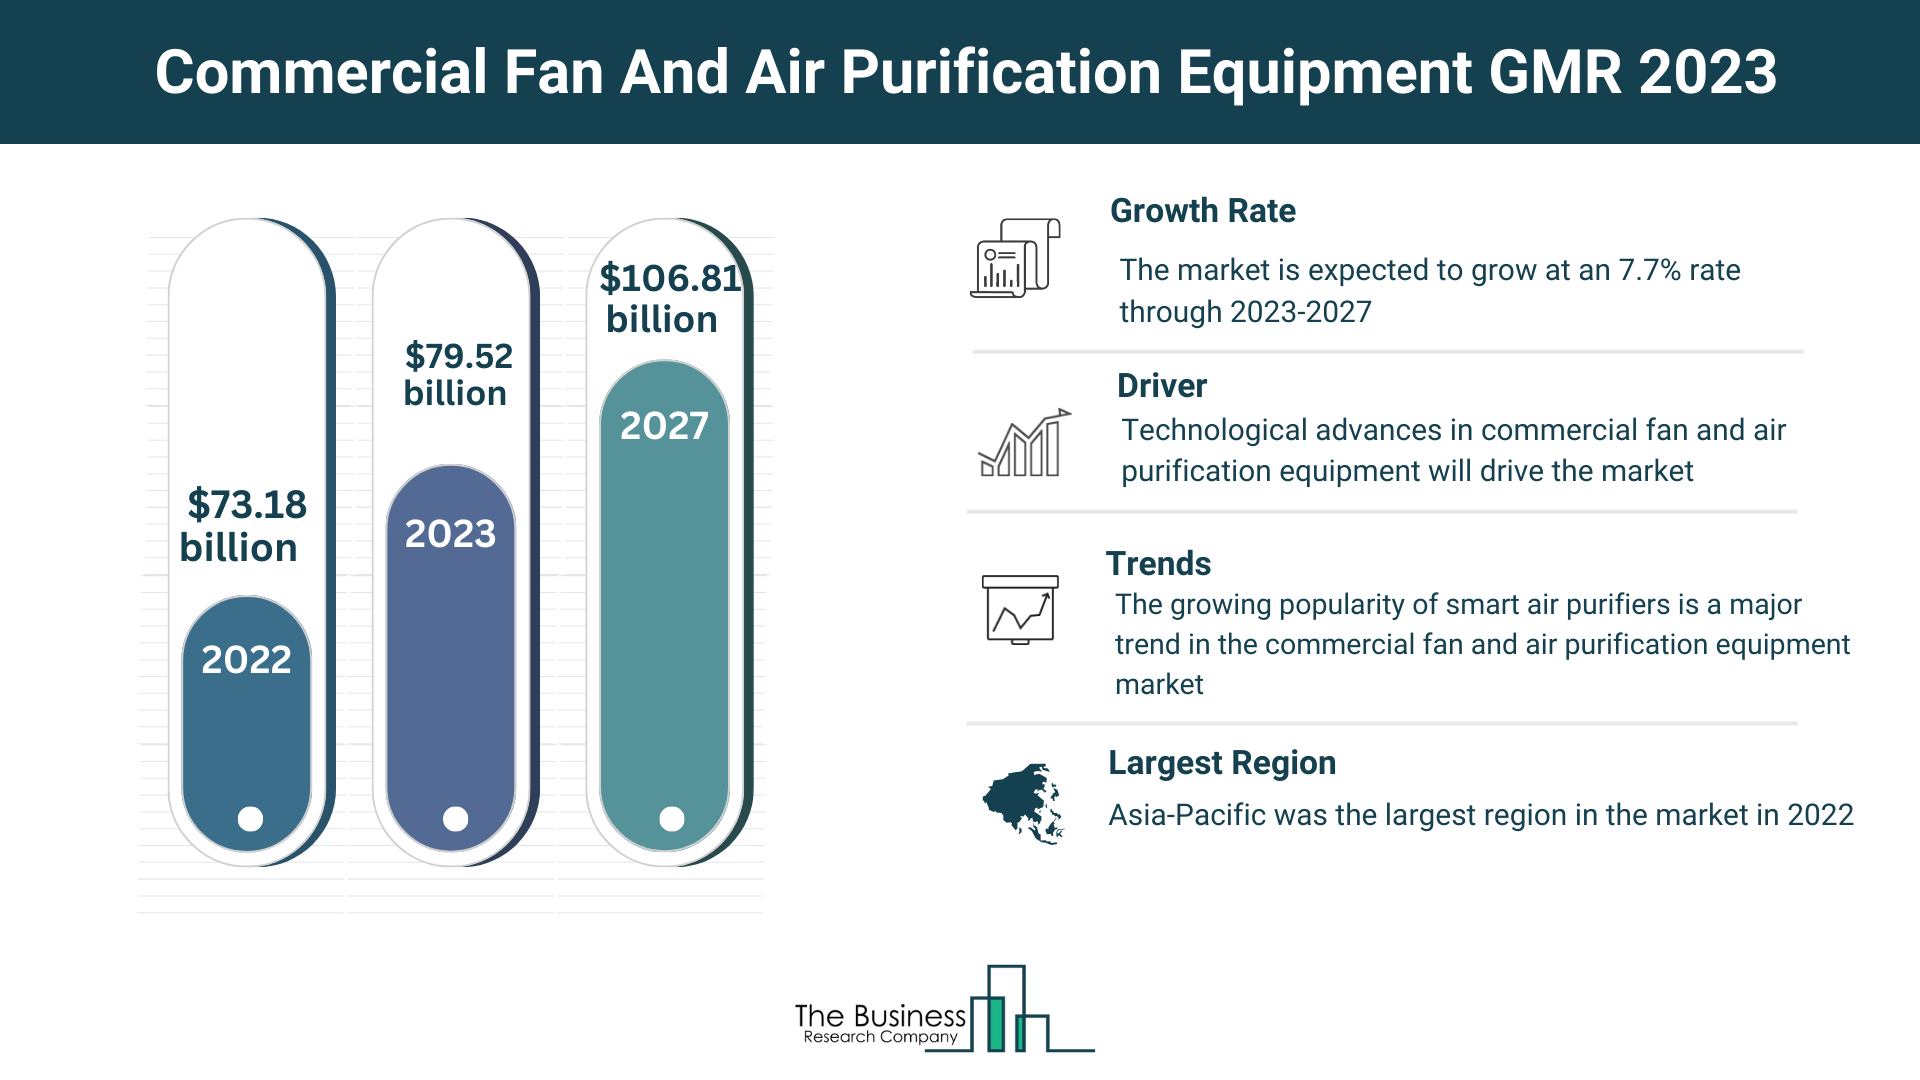 Global Commercial Fan And Air Purification Equipment Market